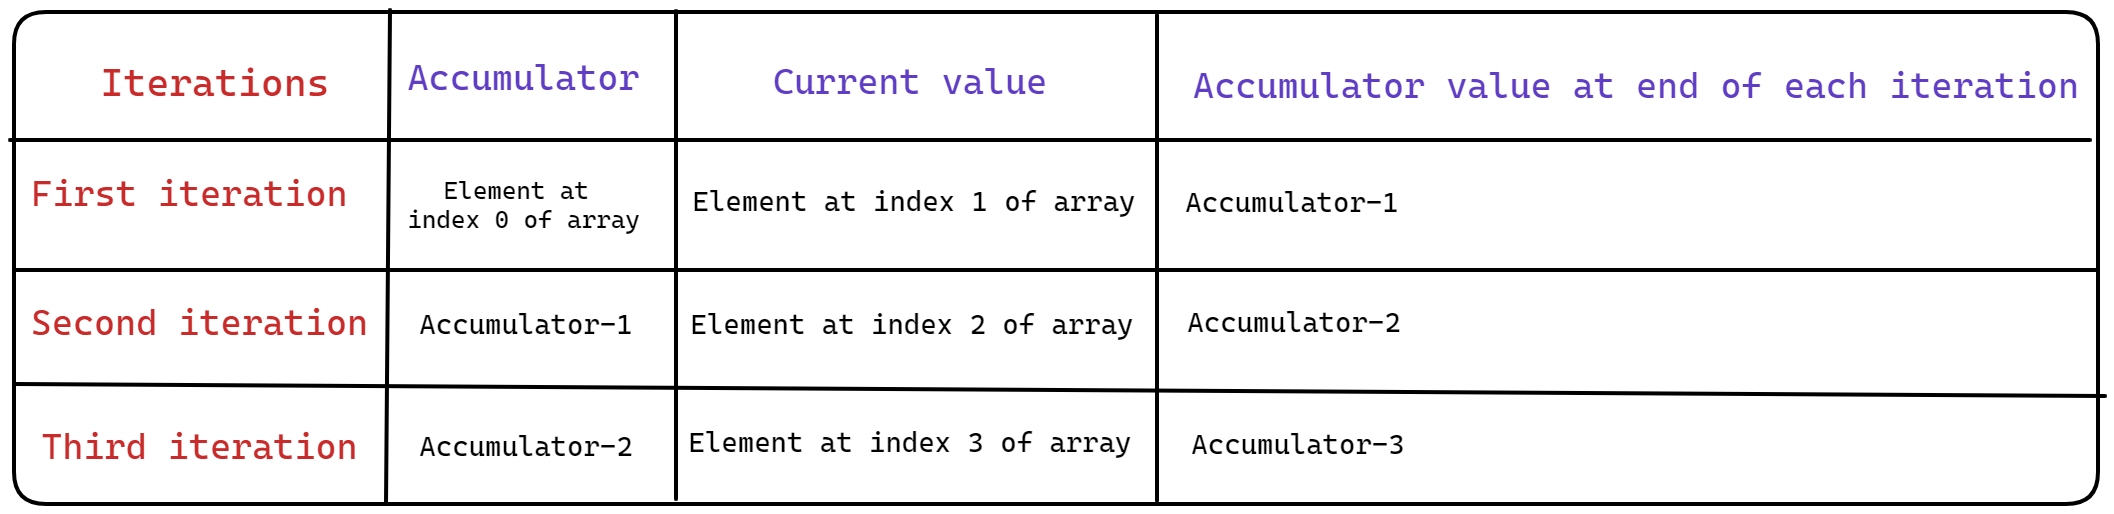 diagram explaining how current value and accumulator changes during each iteration when initial value is not present